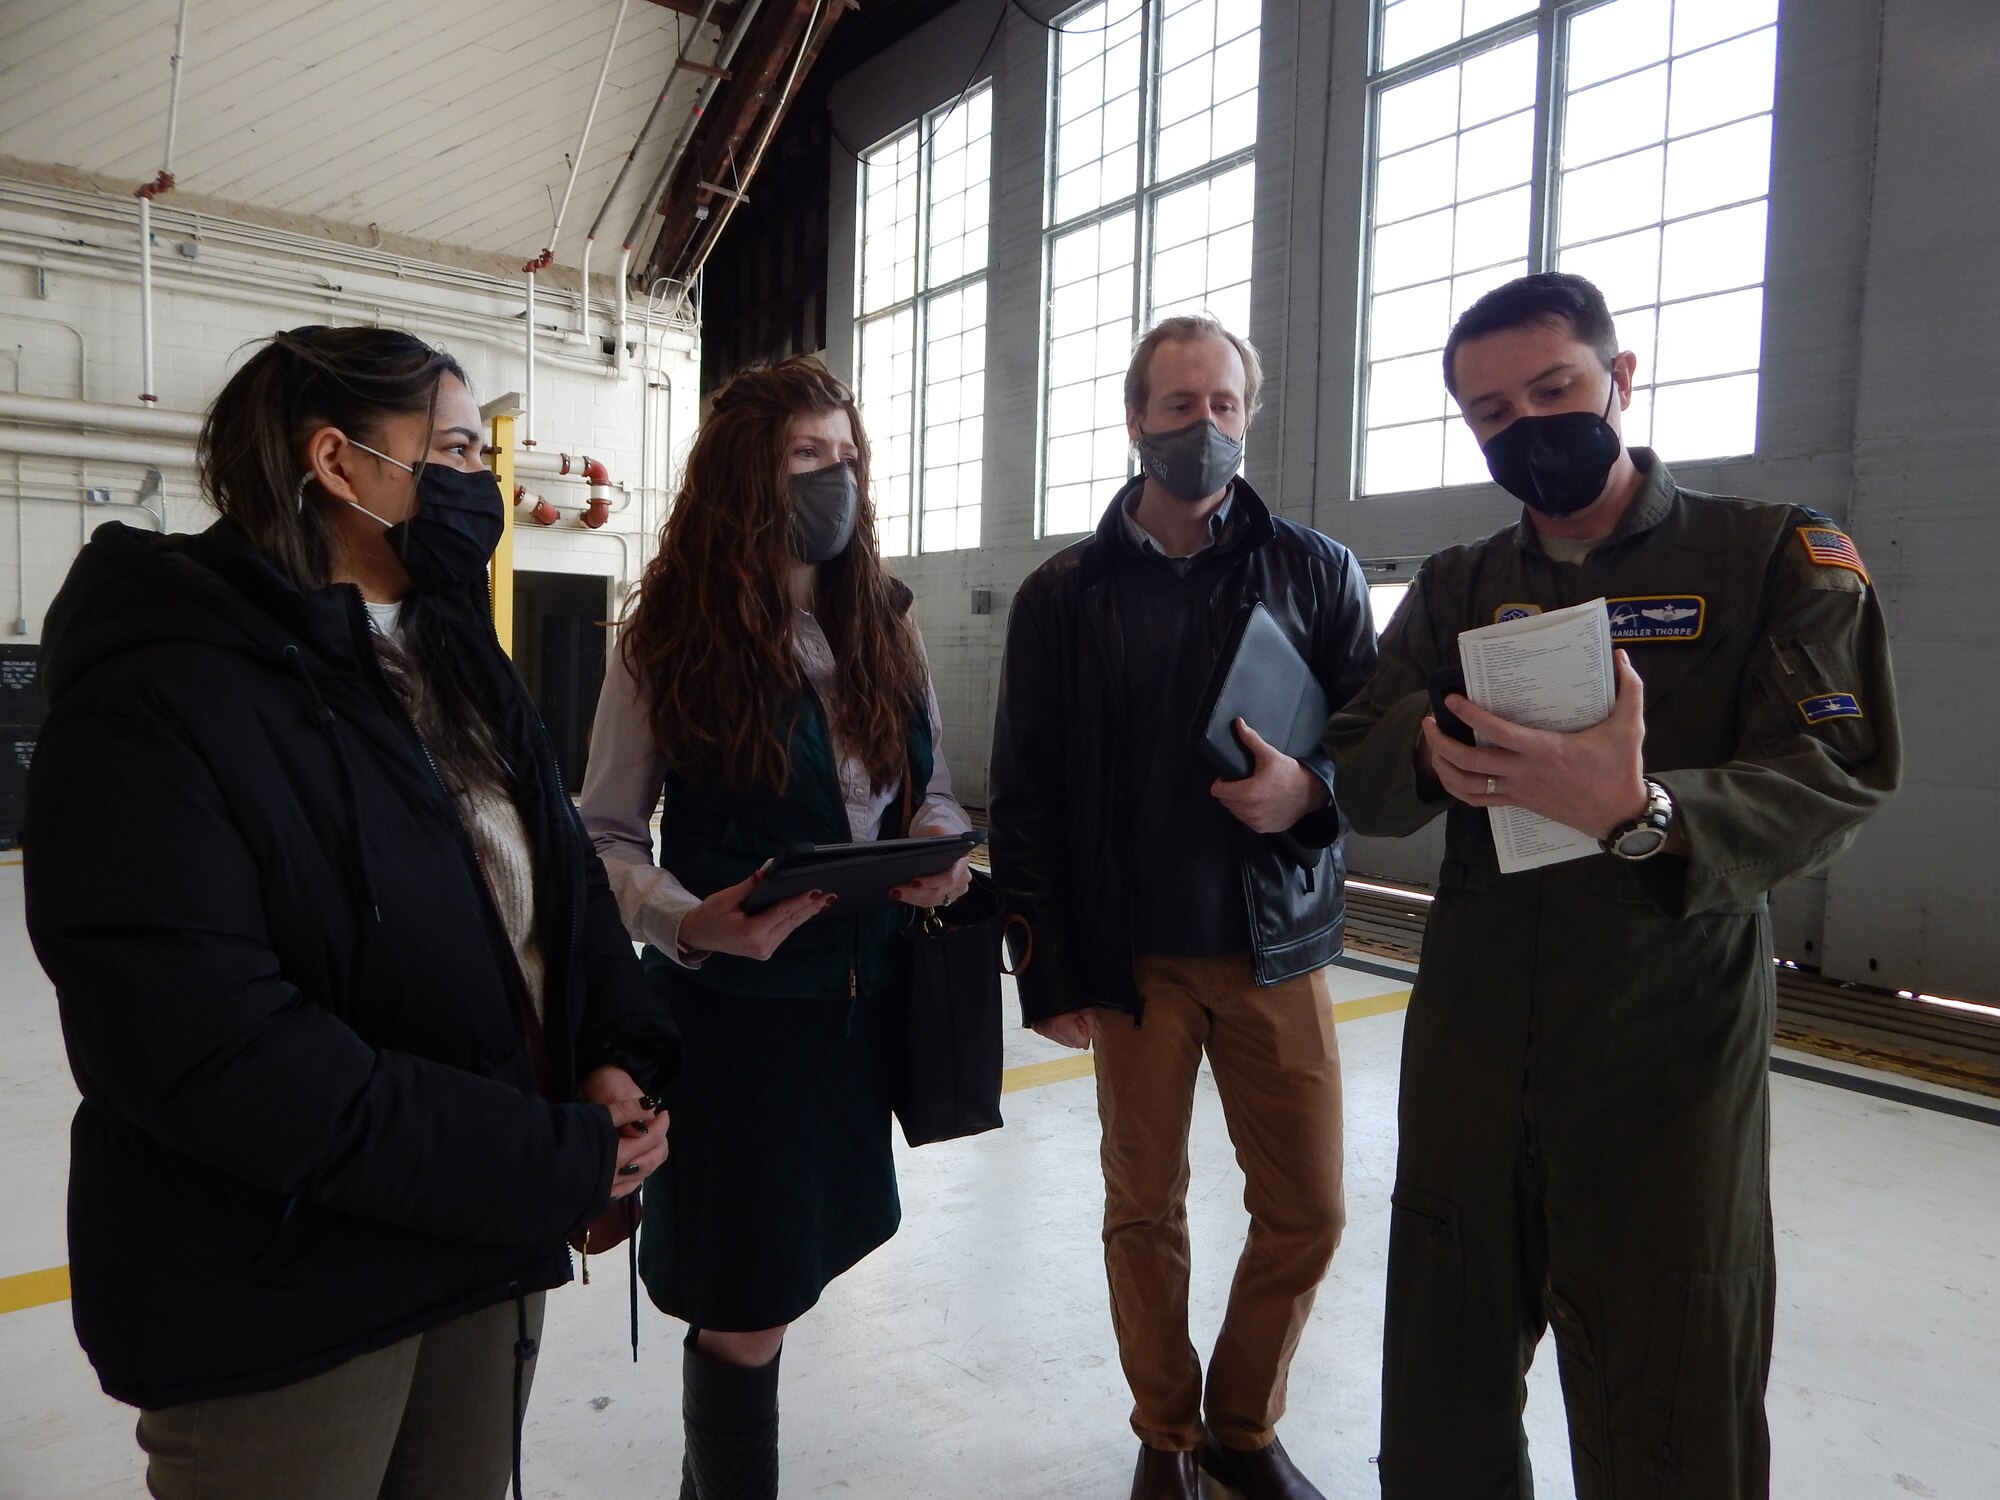 C-21 pilot Capt. Chandler Thorpe, 458th Airlift Squadron, shows Washington University graduate students (left to right) Mehir Walia, Kelsey Giaimo, and Kyle Gero a pre-flight checklist.  As part of the university’s Innovation for Defense Course, the students are working with Scott Air Force Base’s Elevate innovation team and the squadron to identify potential solutions that would resolve the current challenges C-21 pilots face training on a simulator that does not match the current, updated cockpit configuration.  (Photo by Christine Spargur)